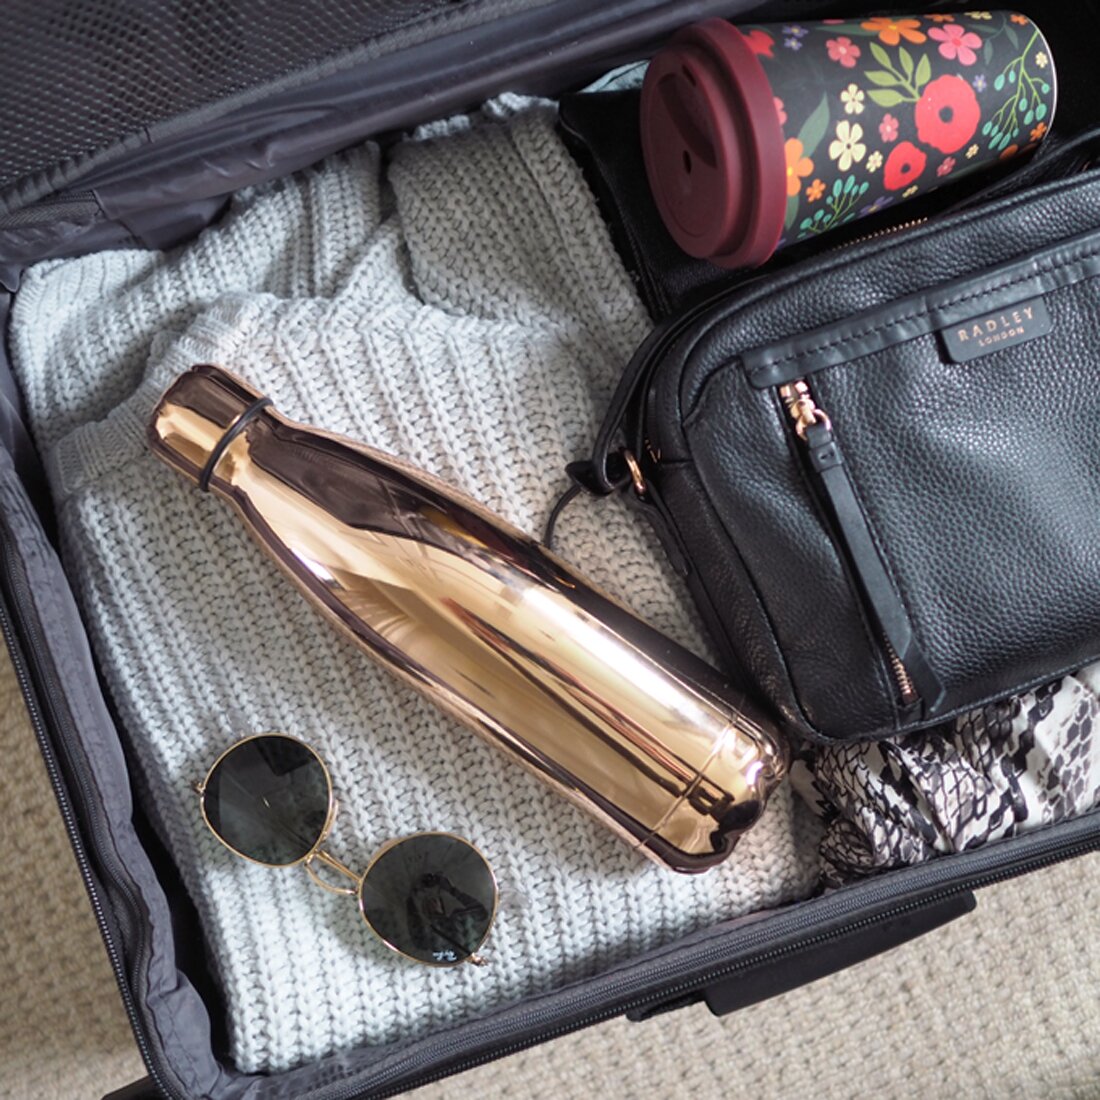 3 Eco-Friendly Travel Products For On The Go | www.MadeUpStyle.com